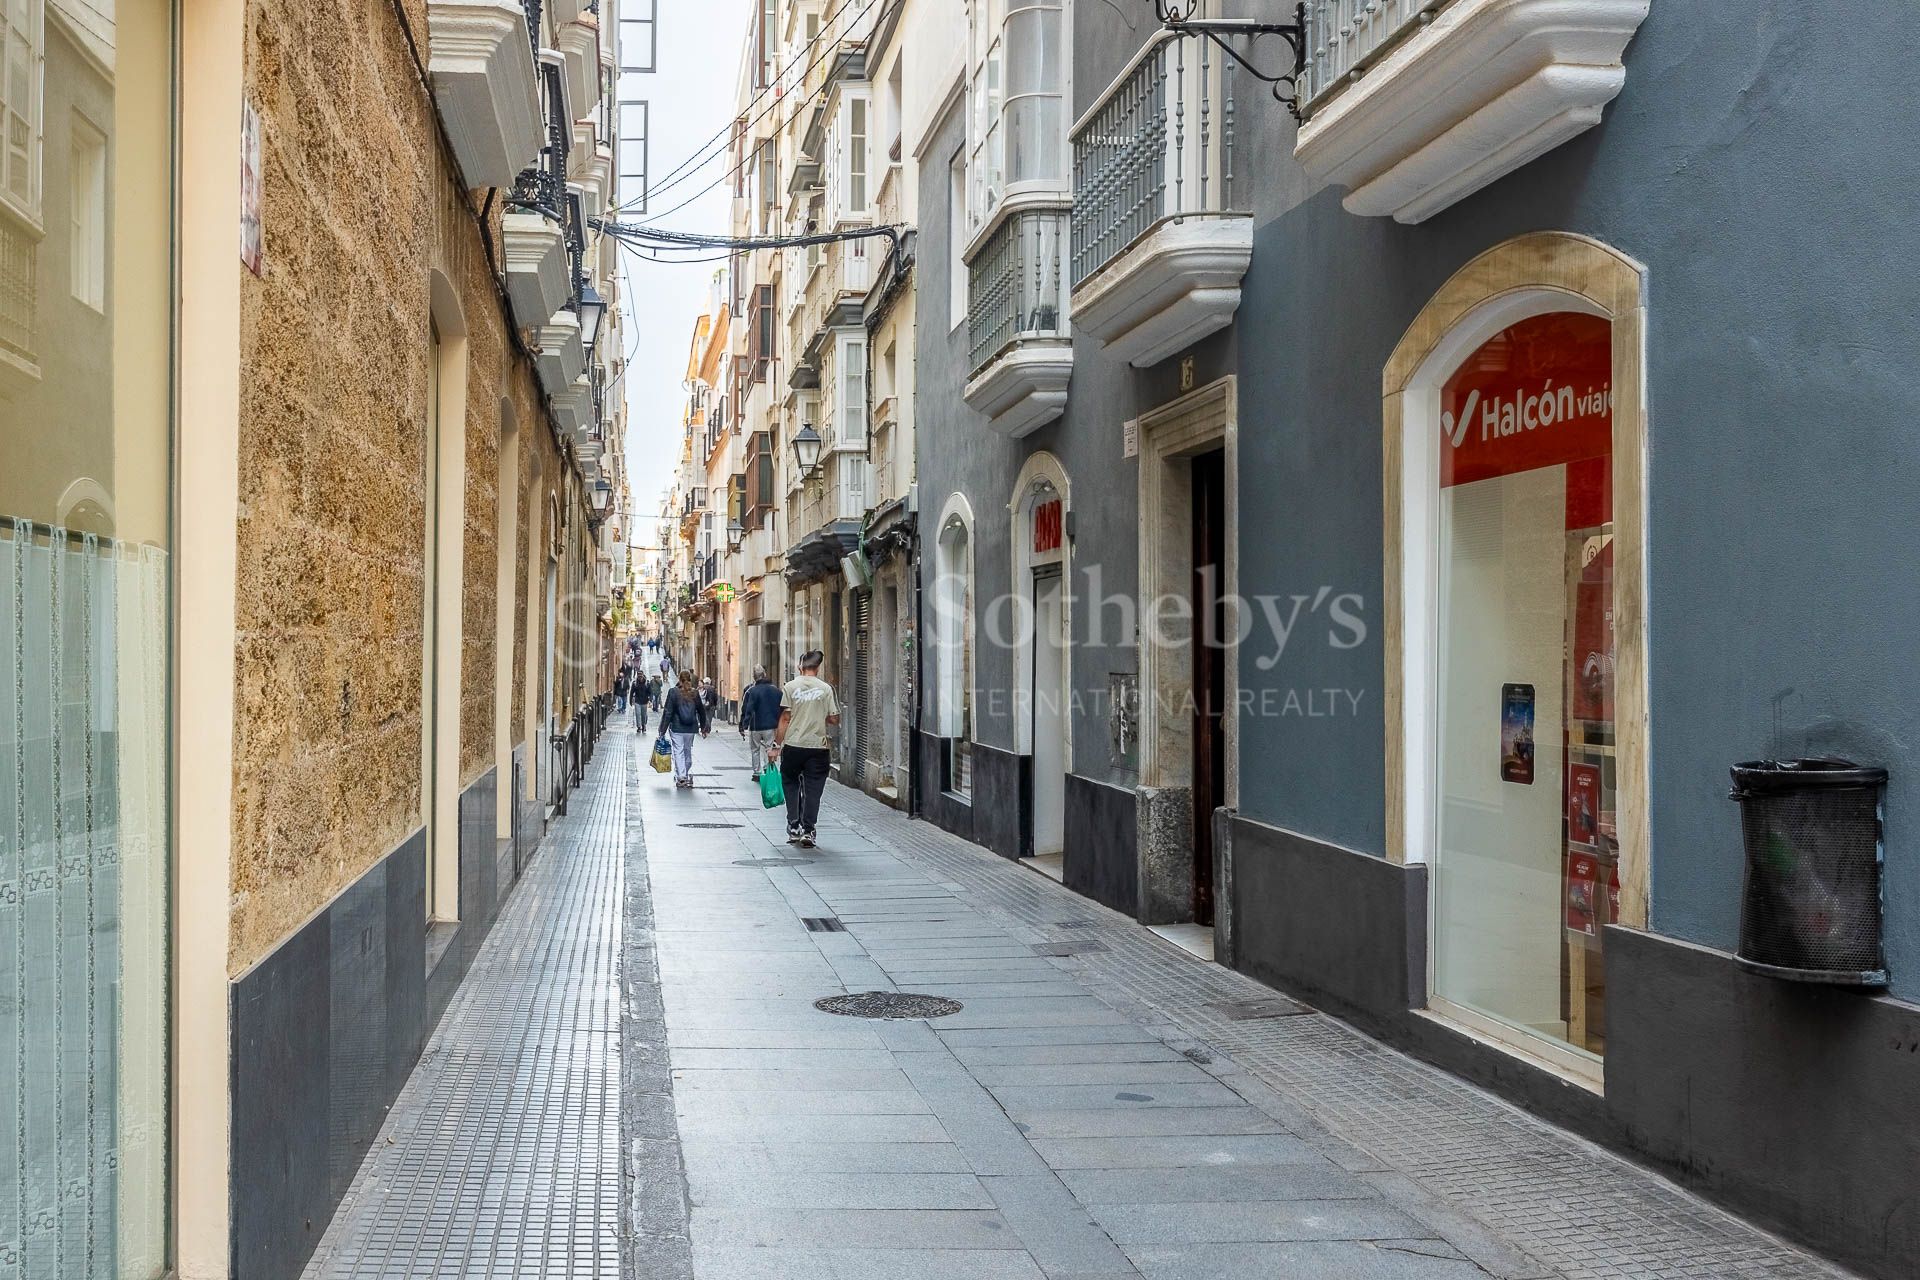 Exclusive property located in an iconic building in the heart of Cadiz.